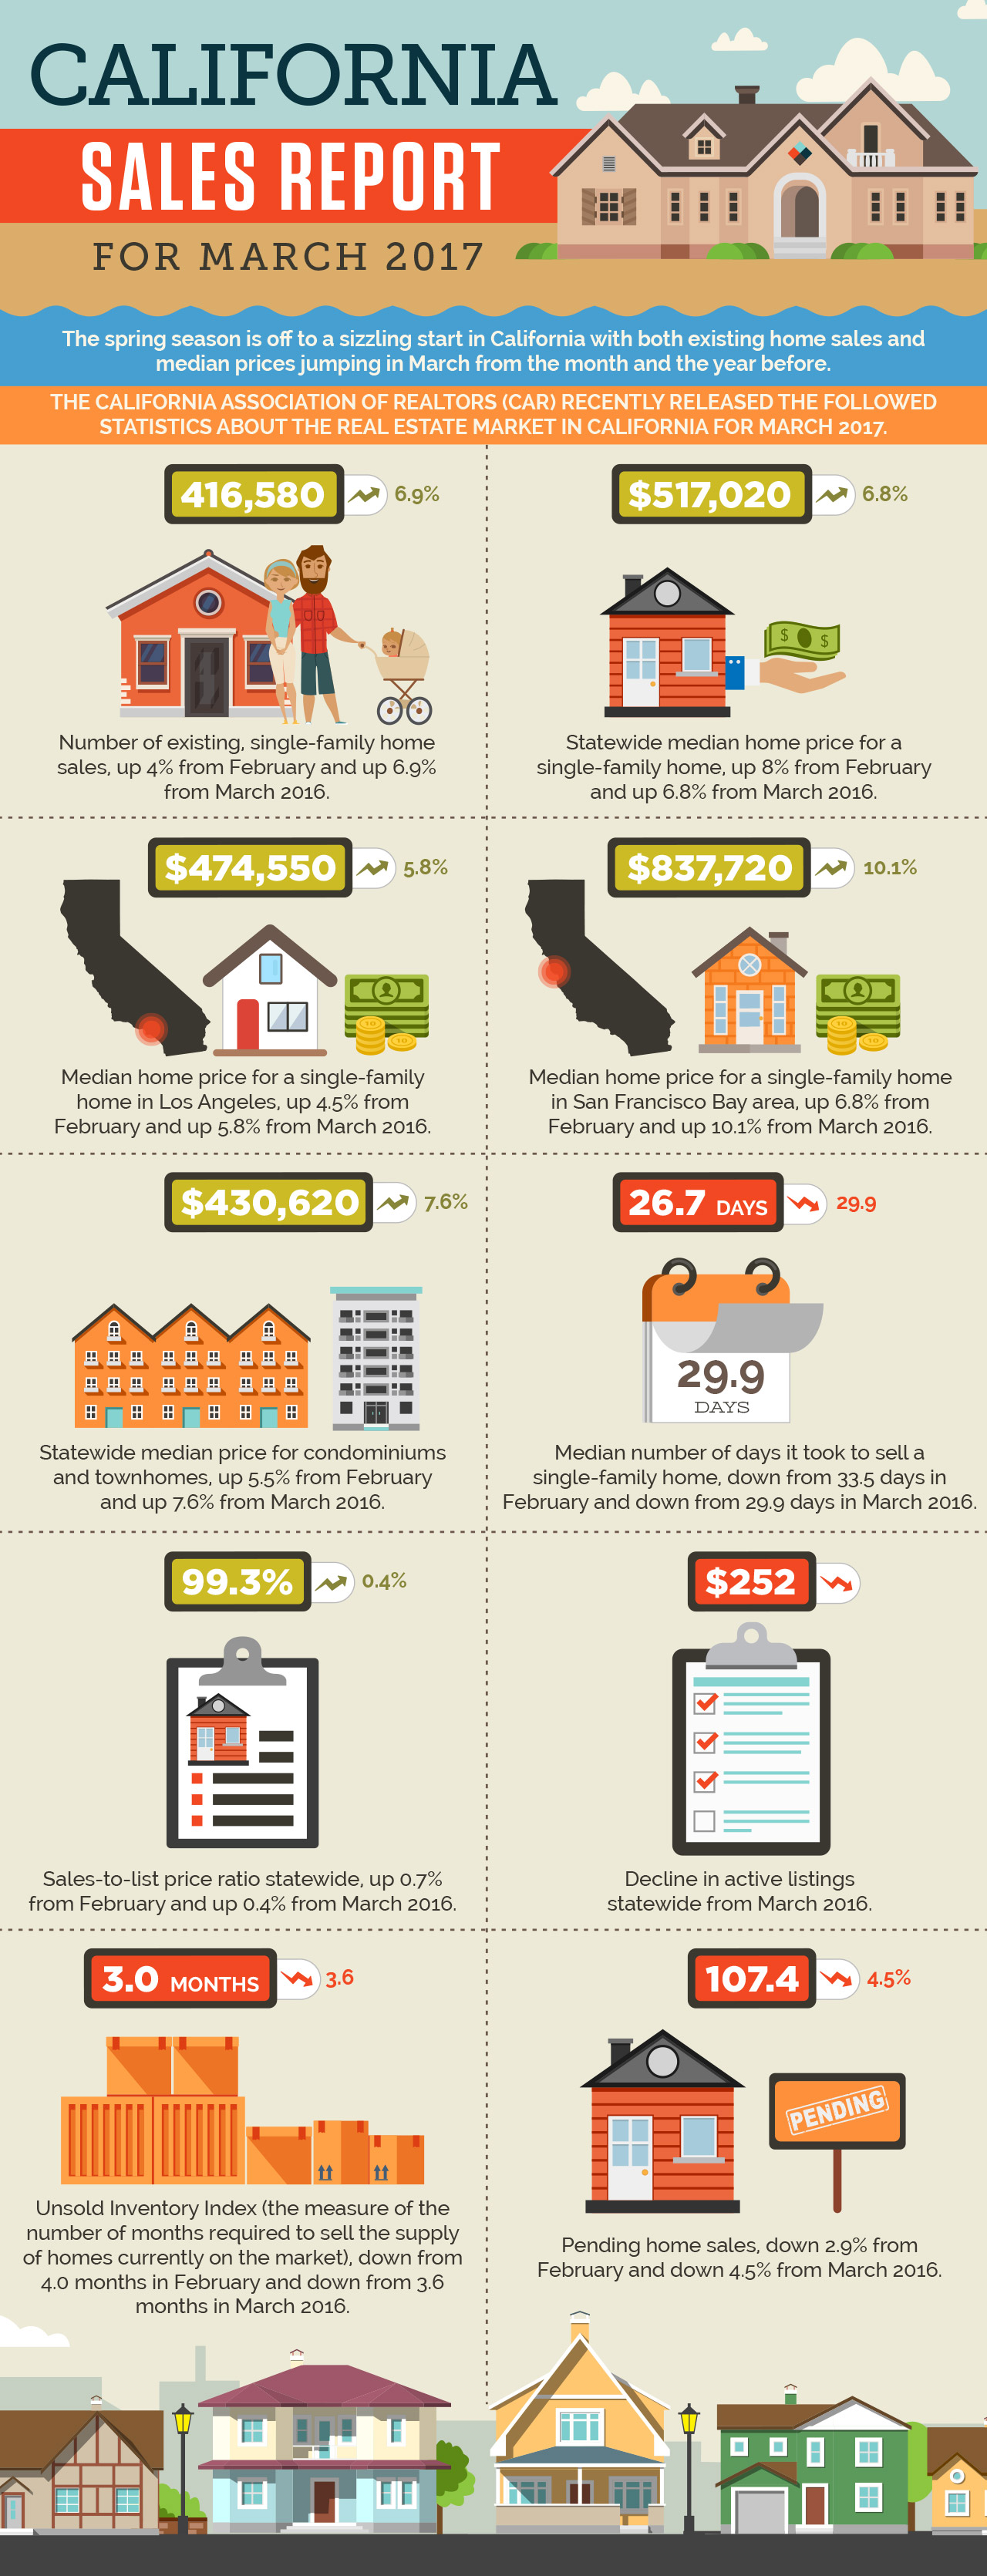 california-sales-report-for-march-2017-infographic